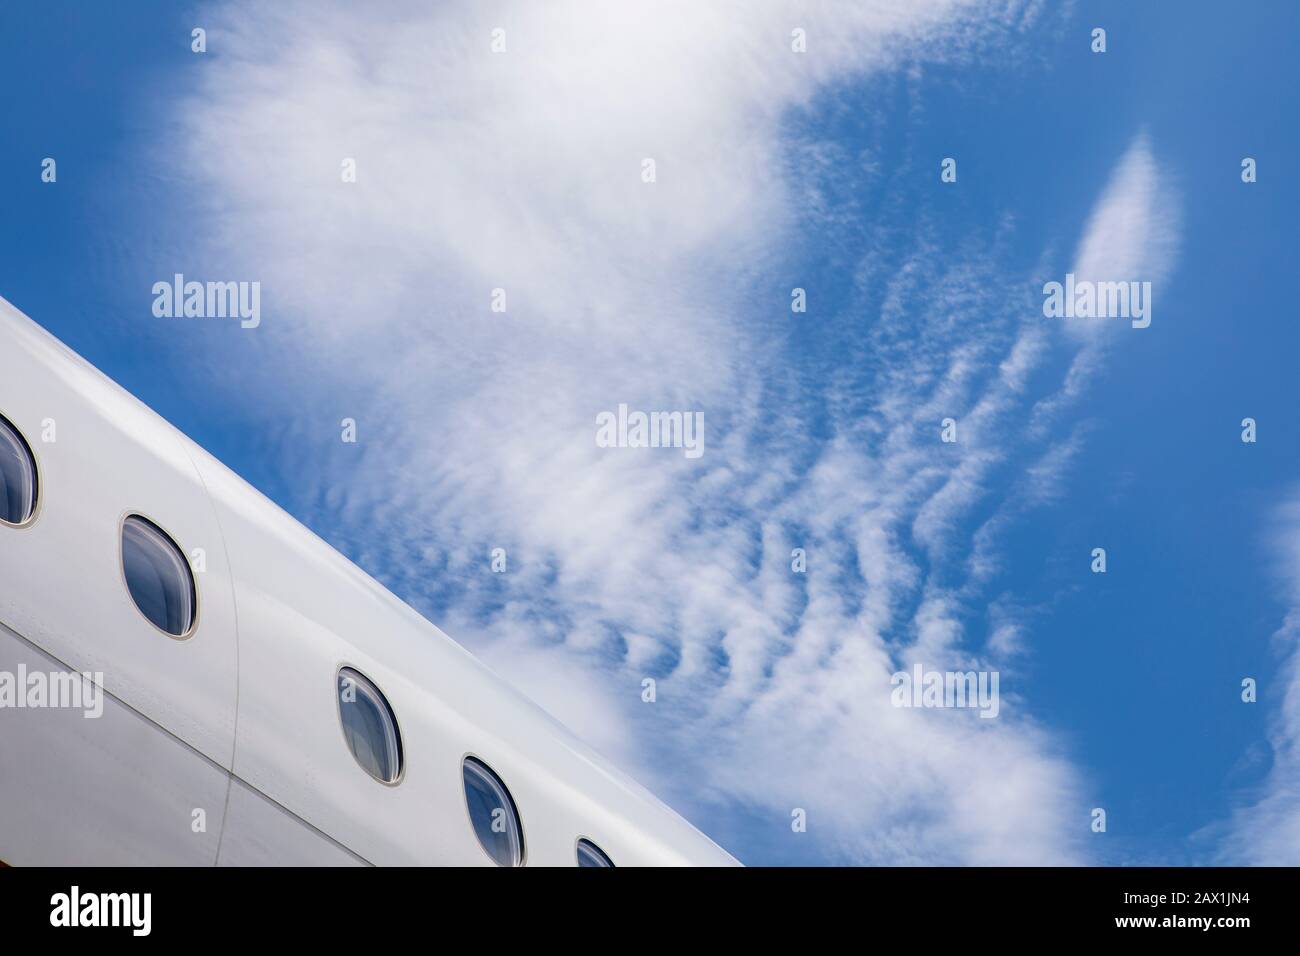 Airplane fuselage mid plane with blue skies Stock Photo